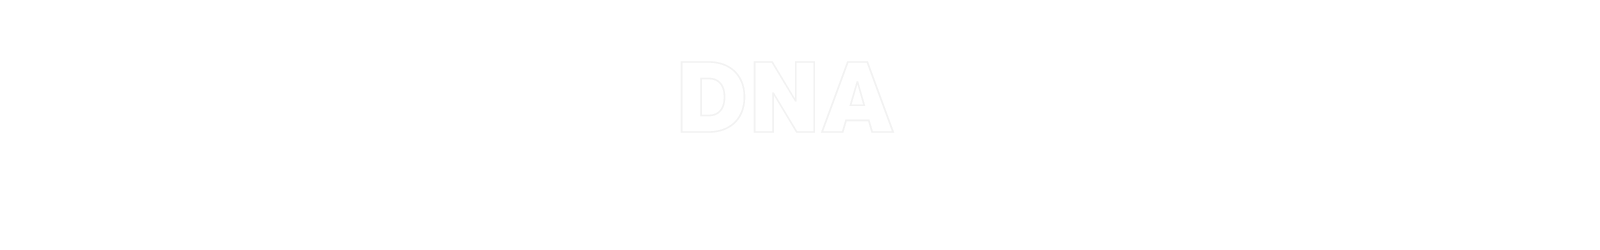 It is in our DNA to be there for our customers